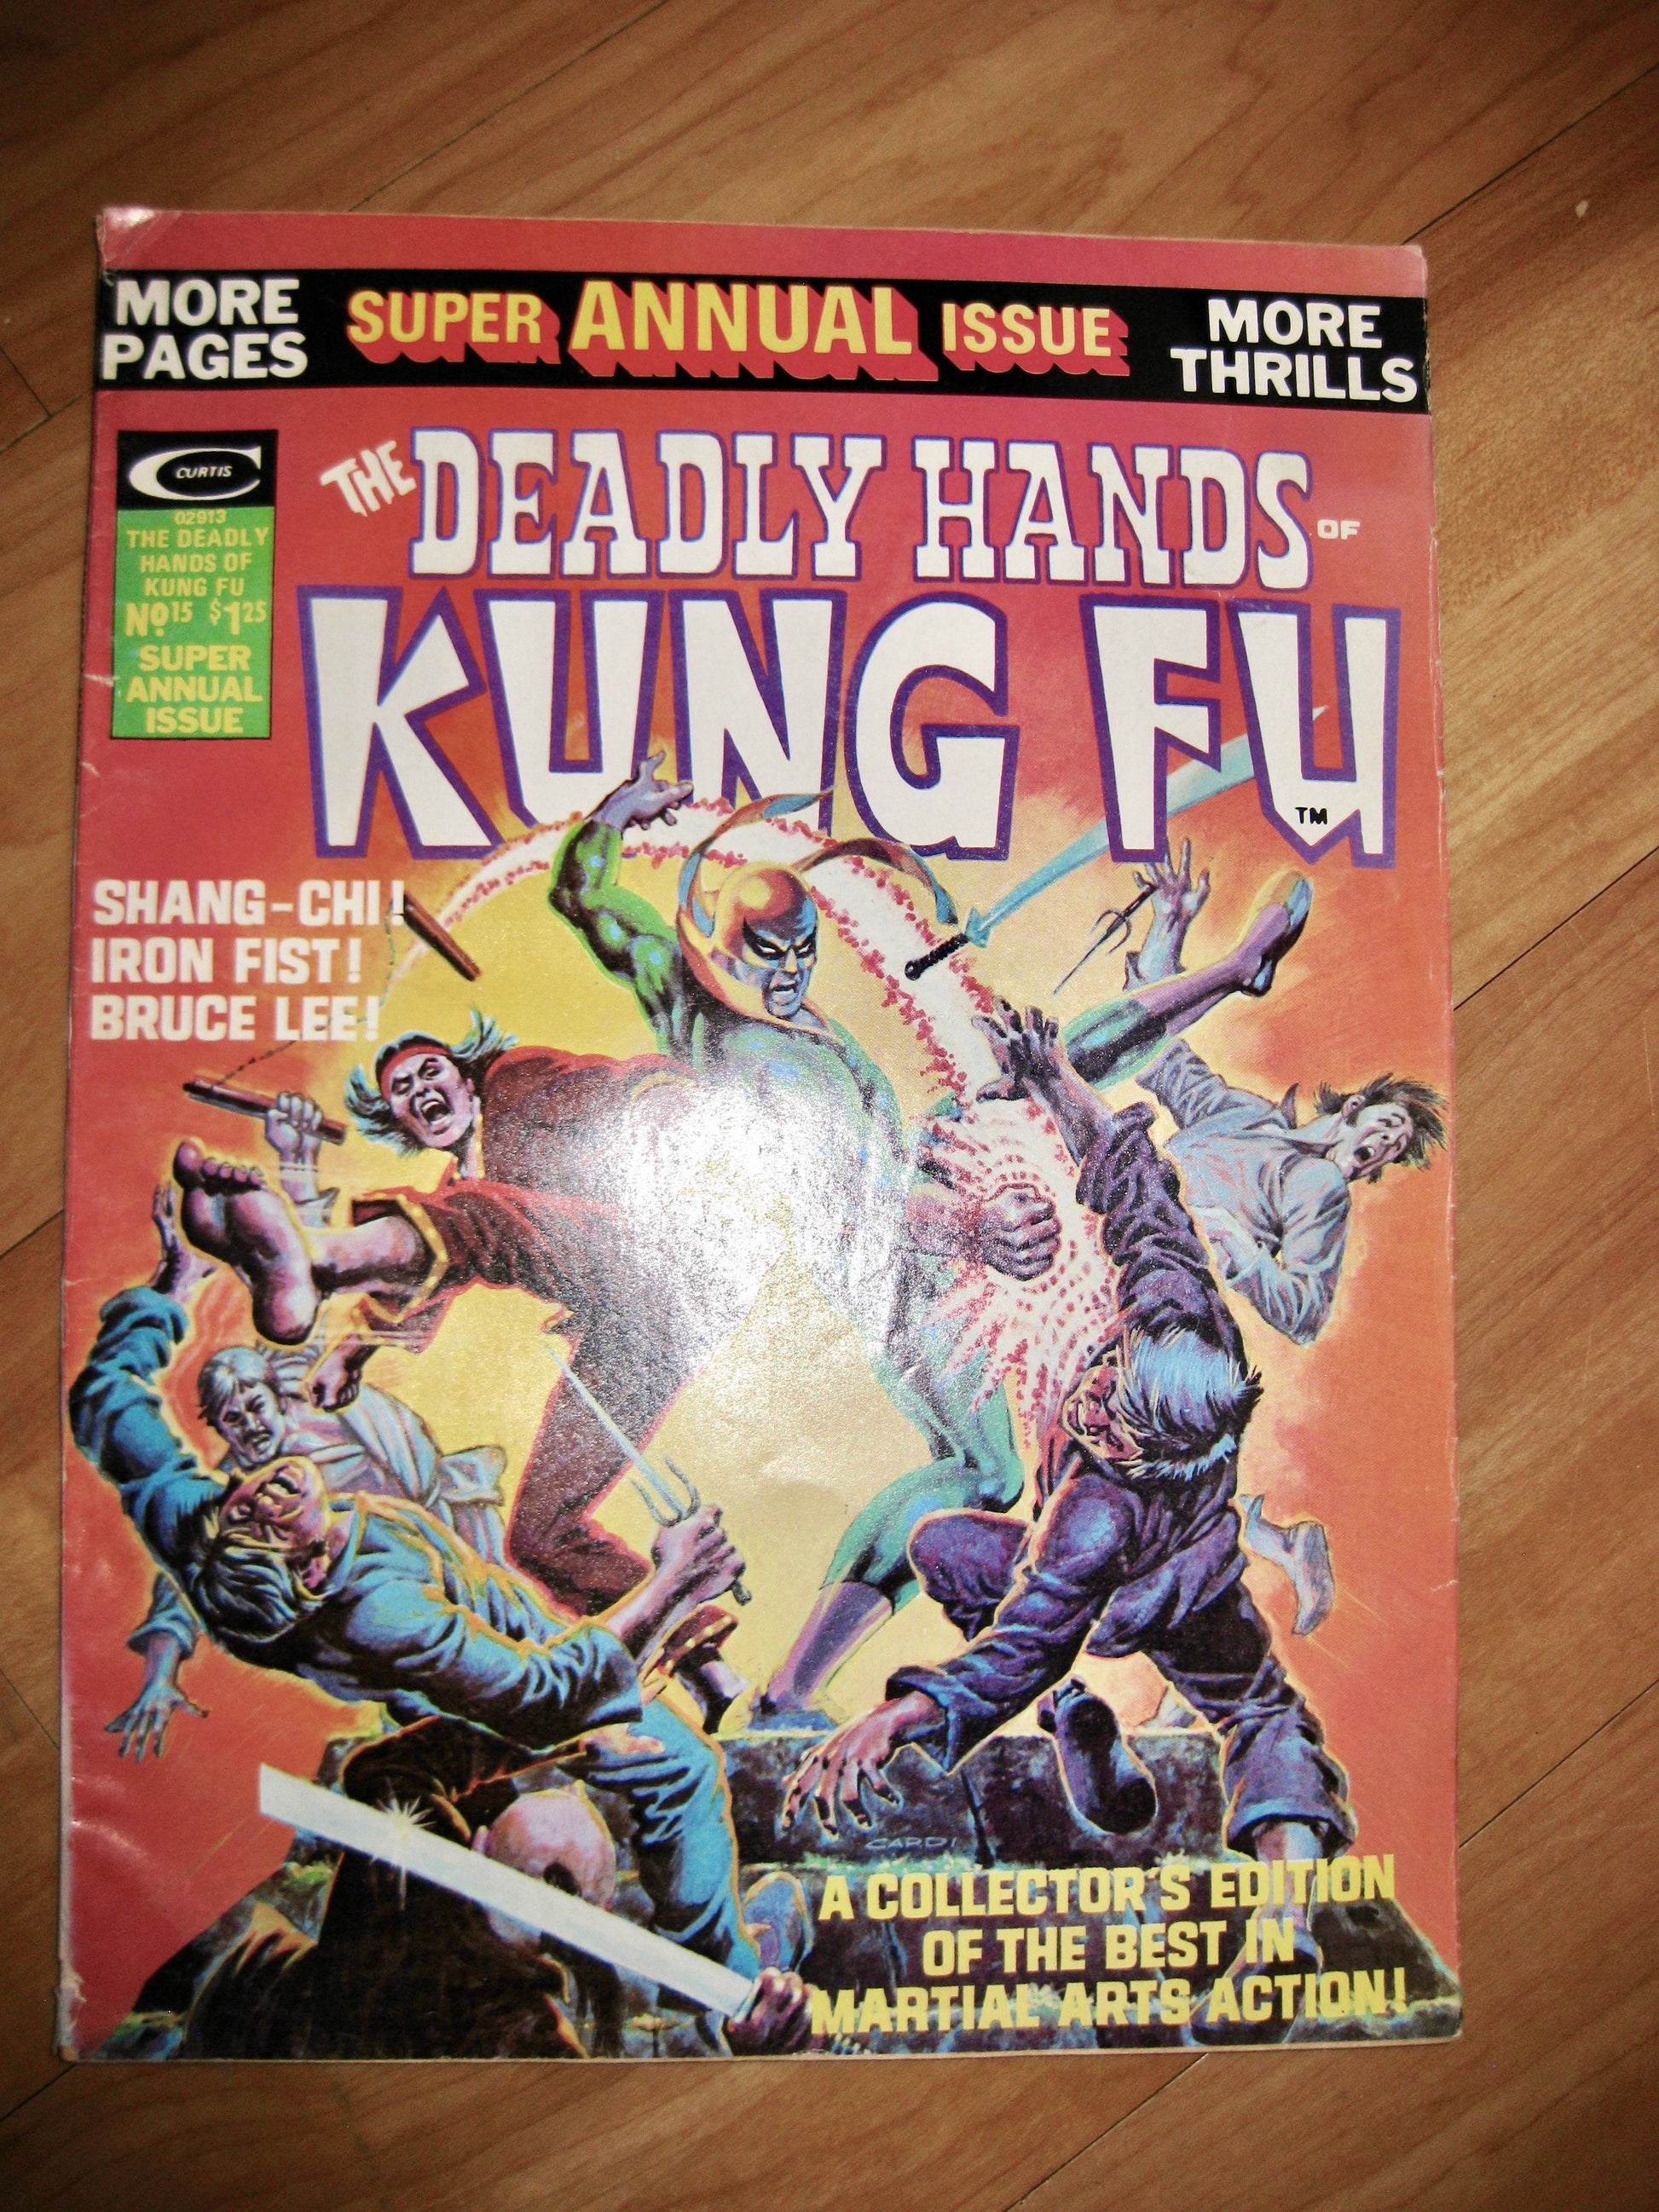 The Deadly Hands Of Kung Fu Vintage Comic Super Annual Edition Summer 1975 Vol 1 No.15